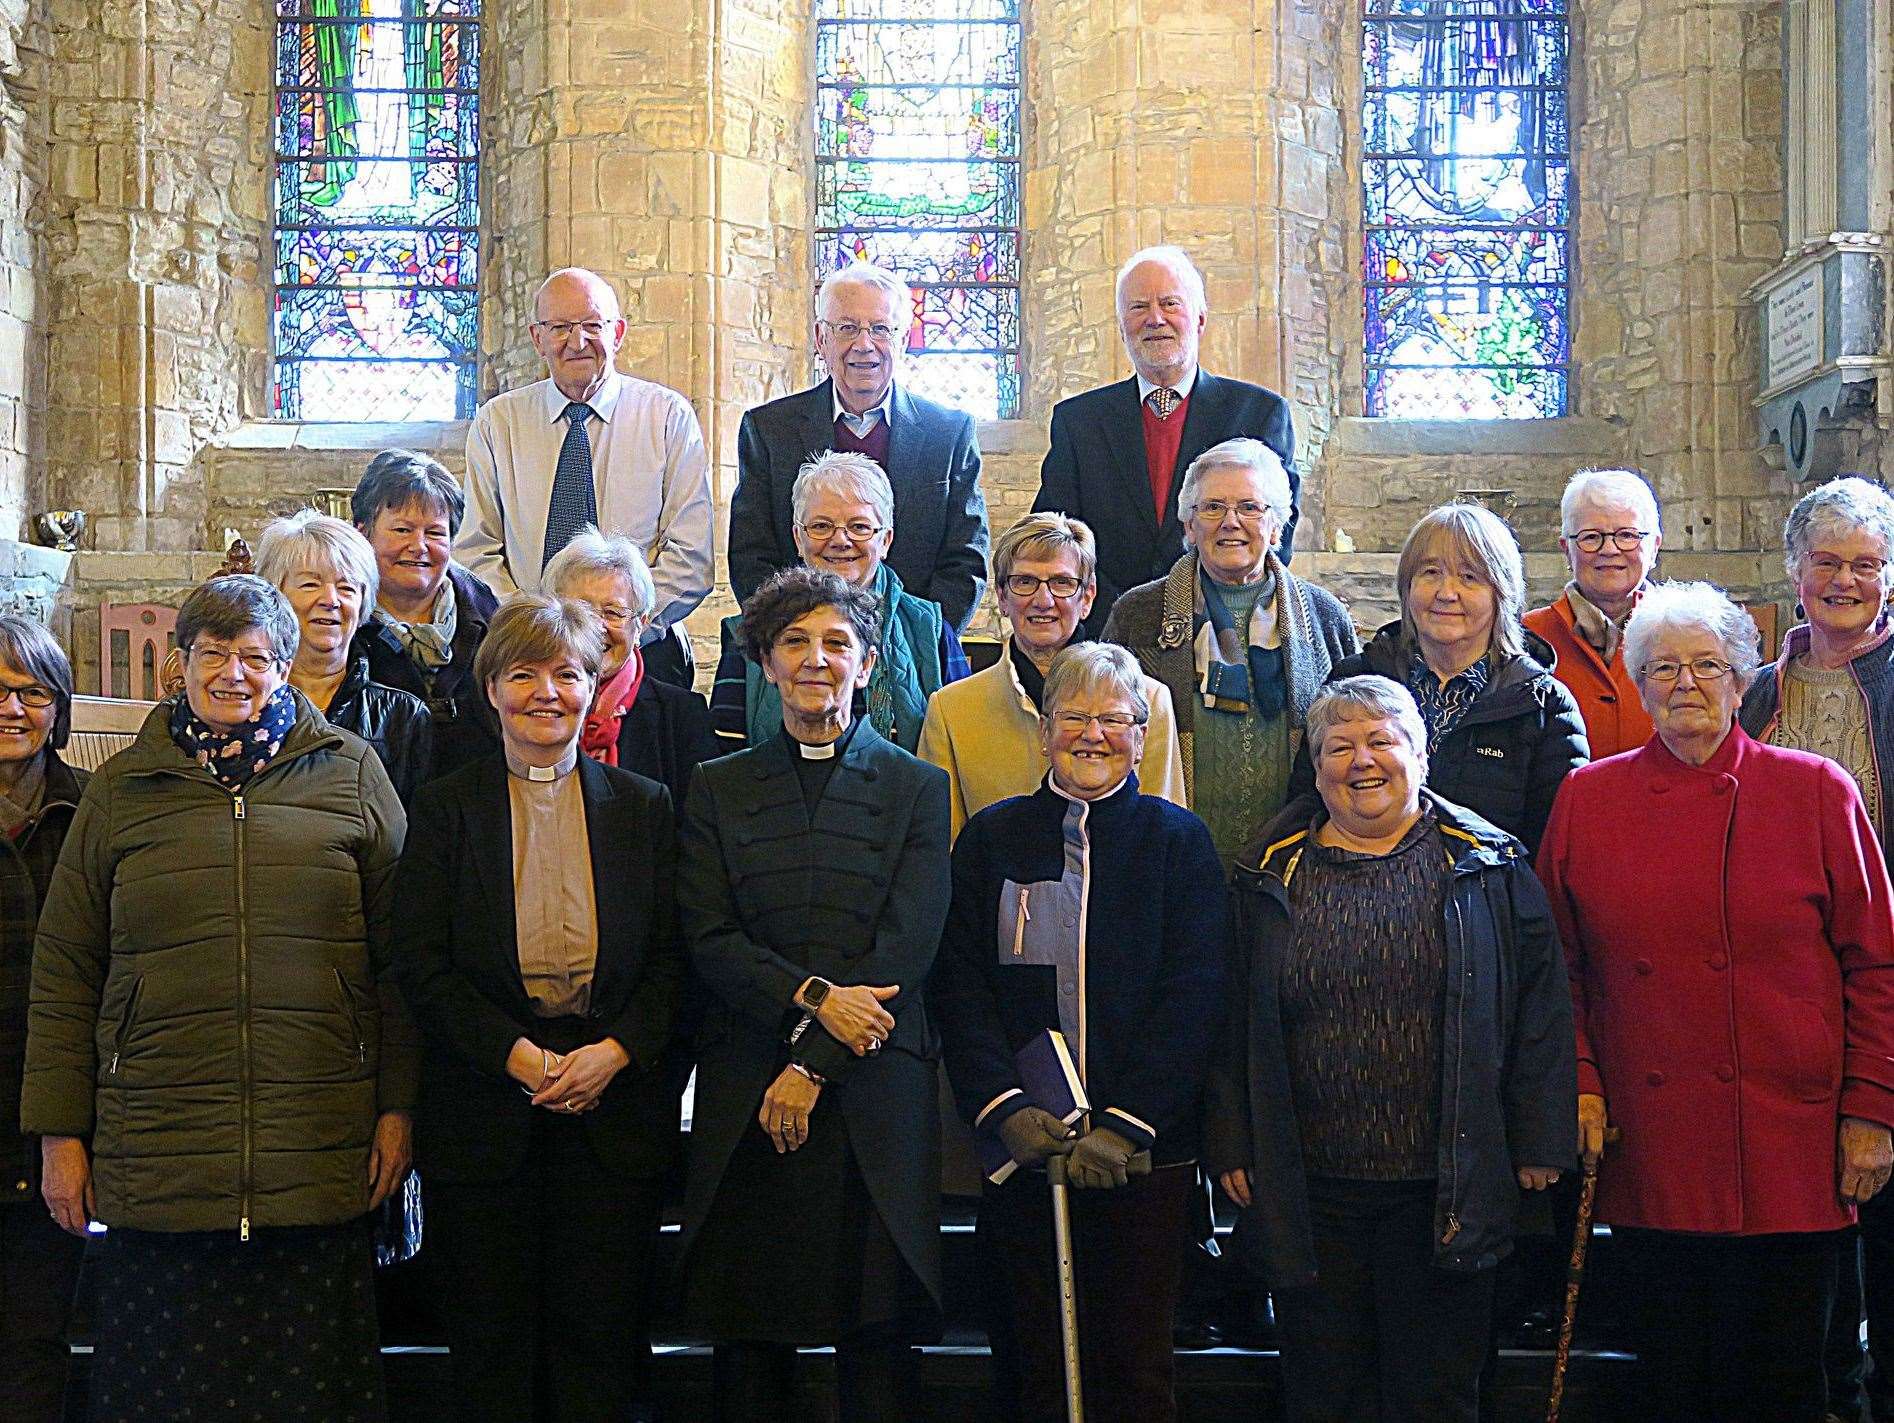 Members of the Kirk Session of Dornoch Firth Church of Scotland.